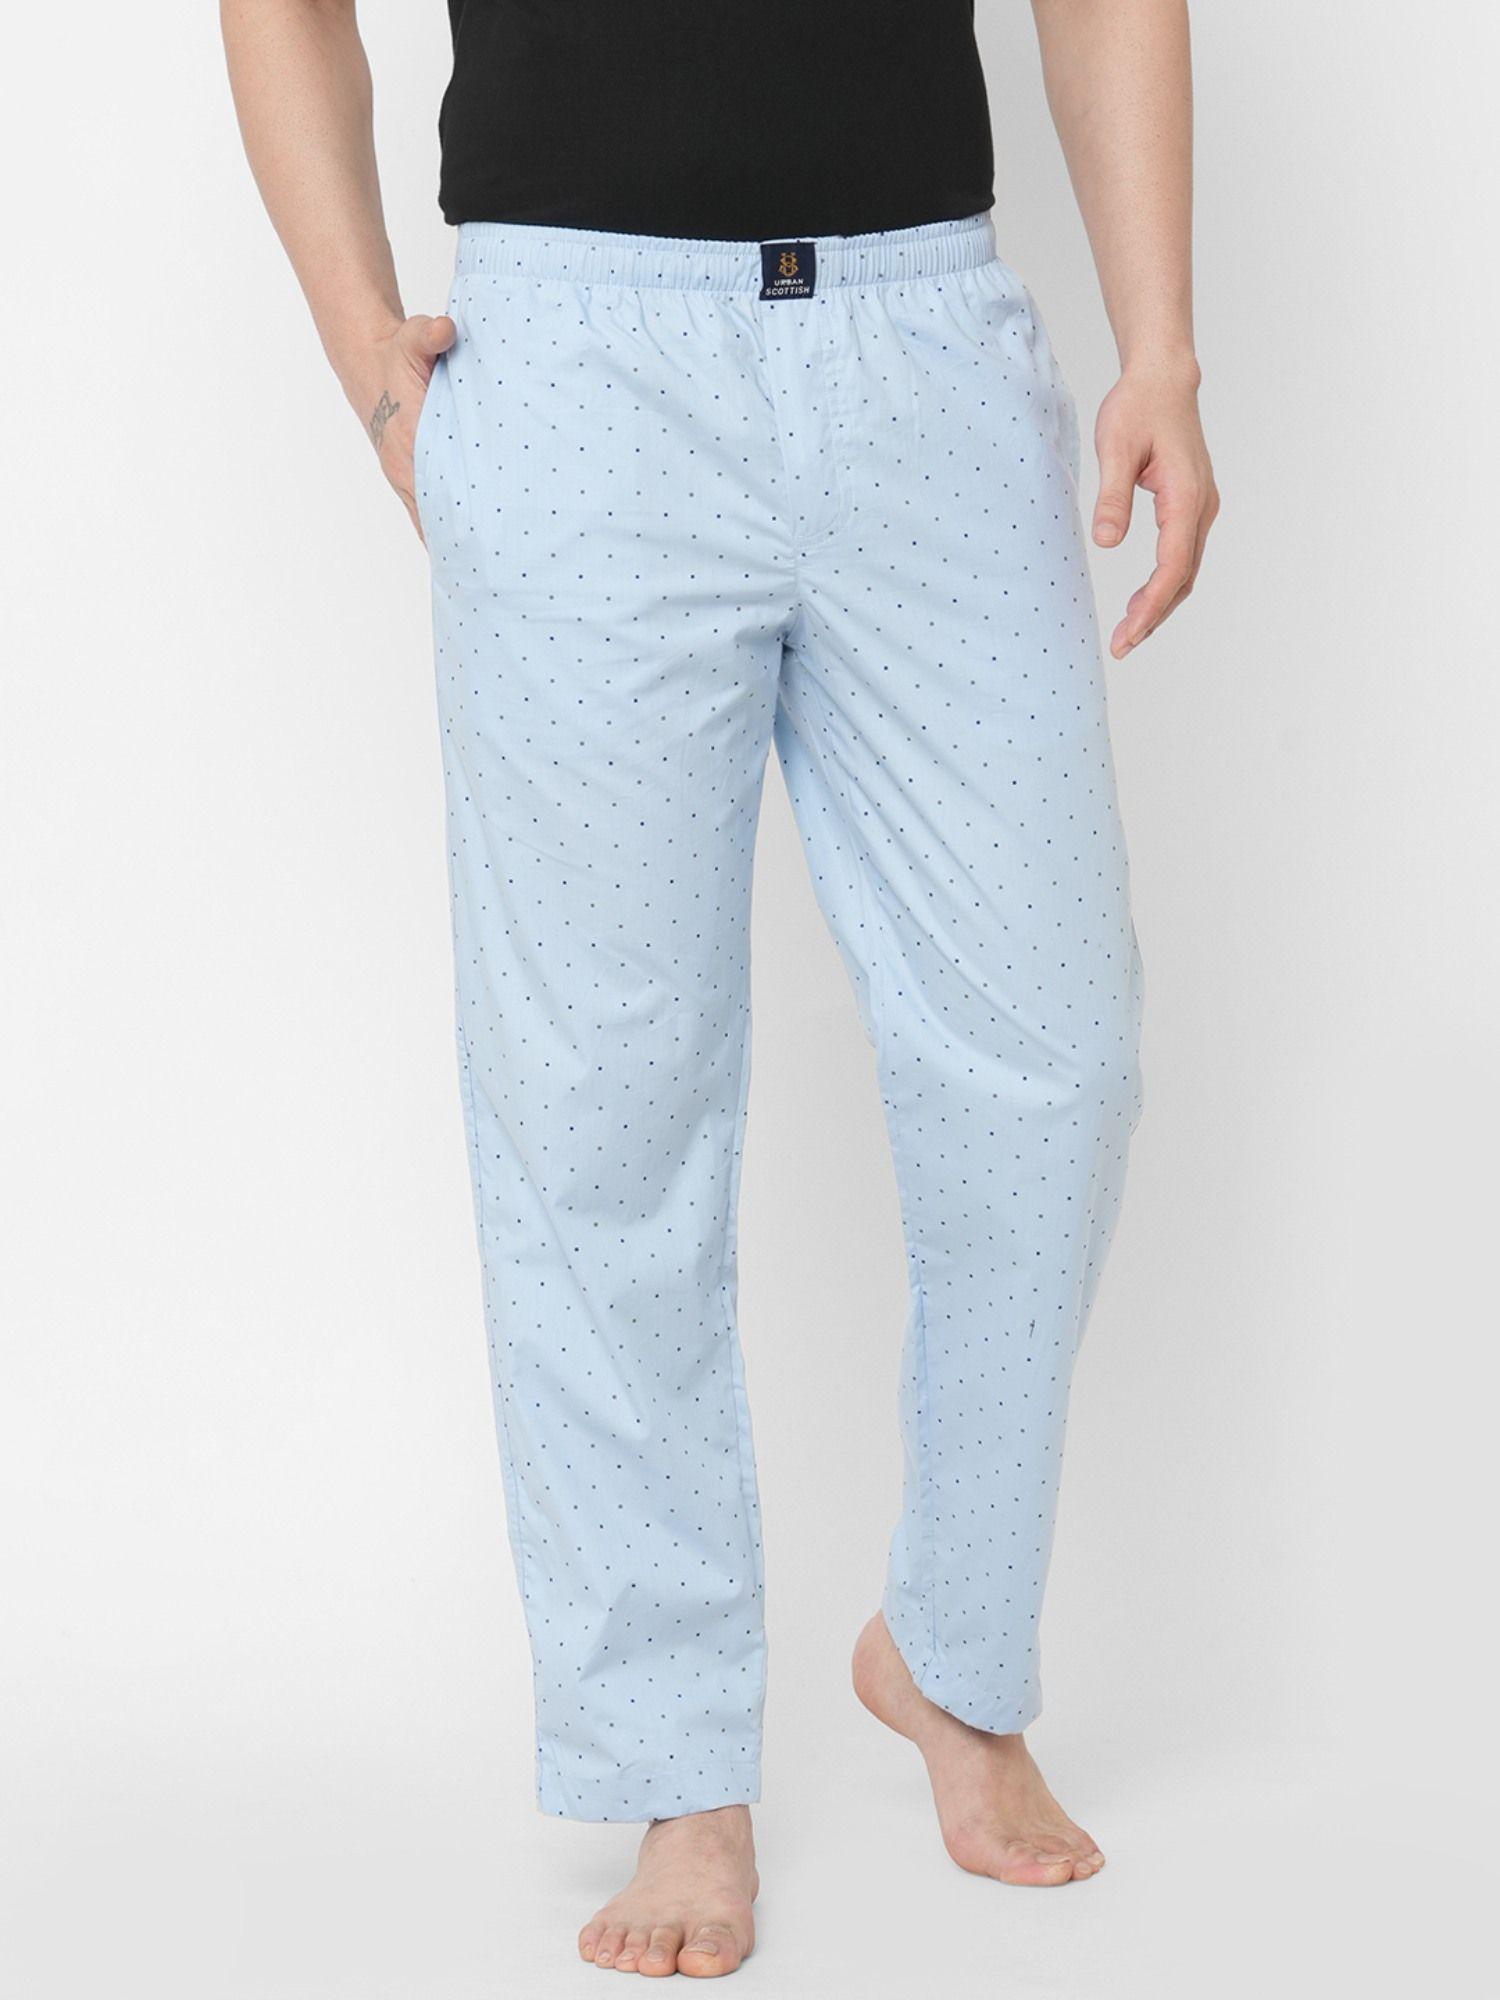 mens printed woven cotton soft & breathable pyjama with side pockets blue